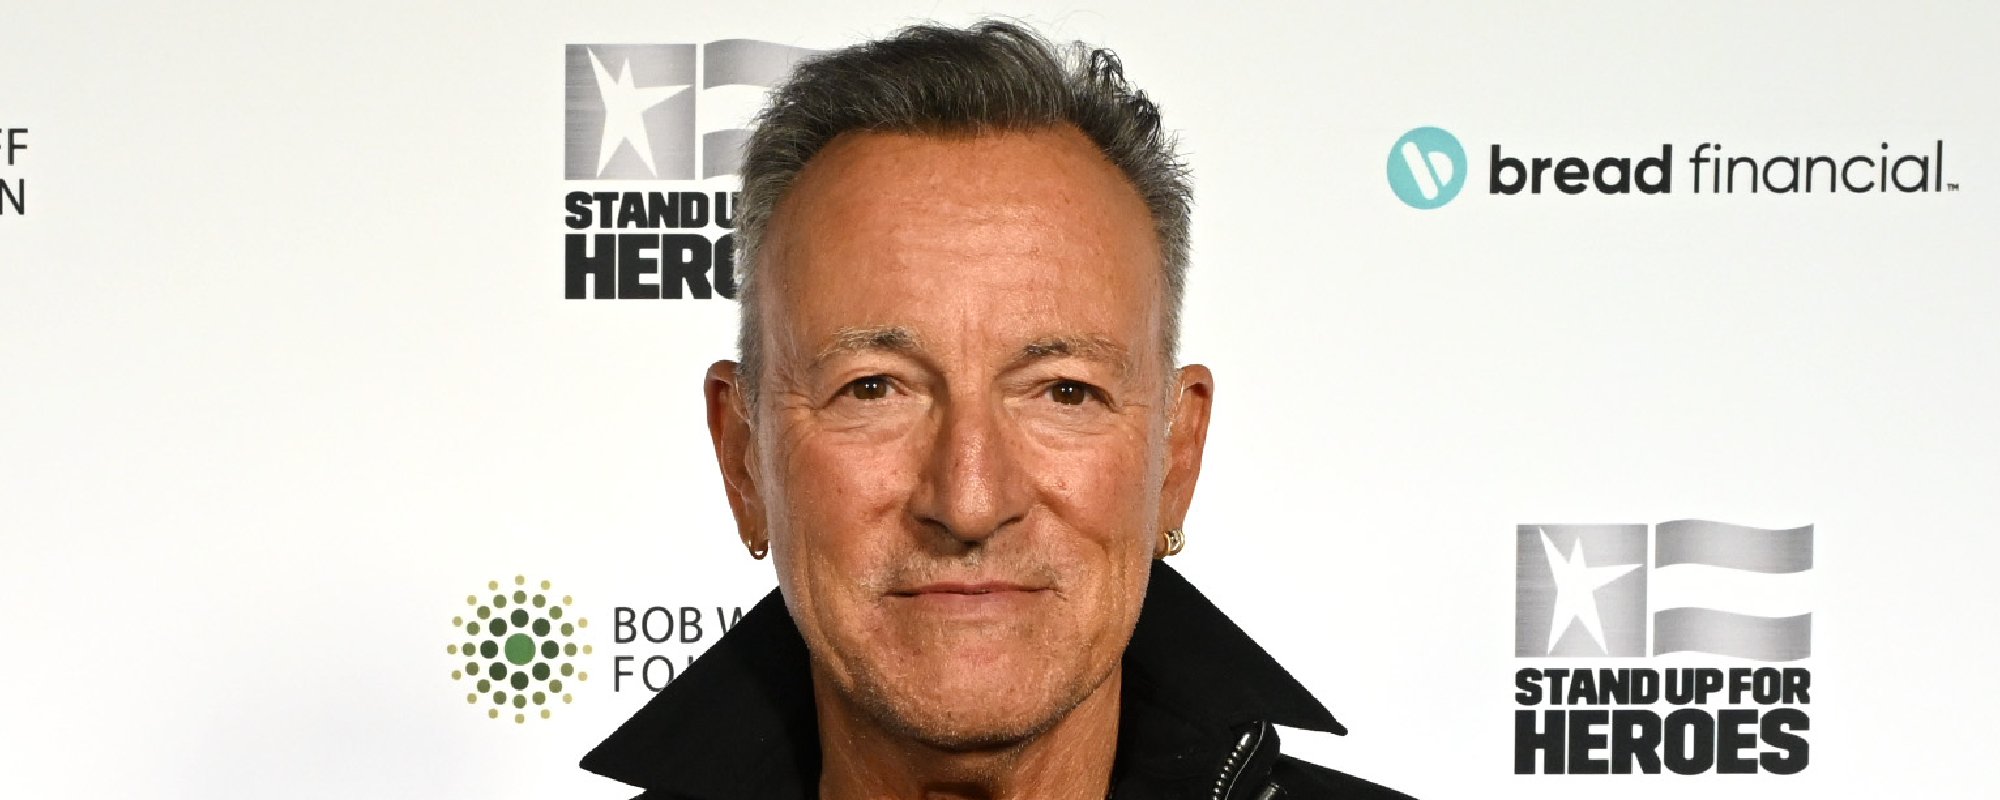 Bruce Springsteen Gives Update on His Struggles With Peptic Ulcer Disease: “It Was Killing Me”